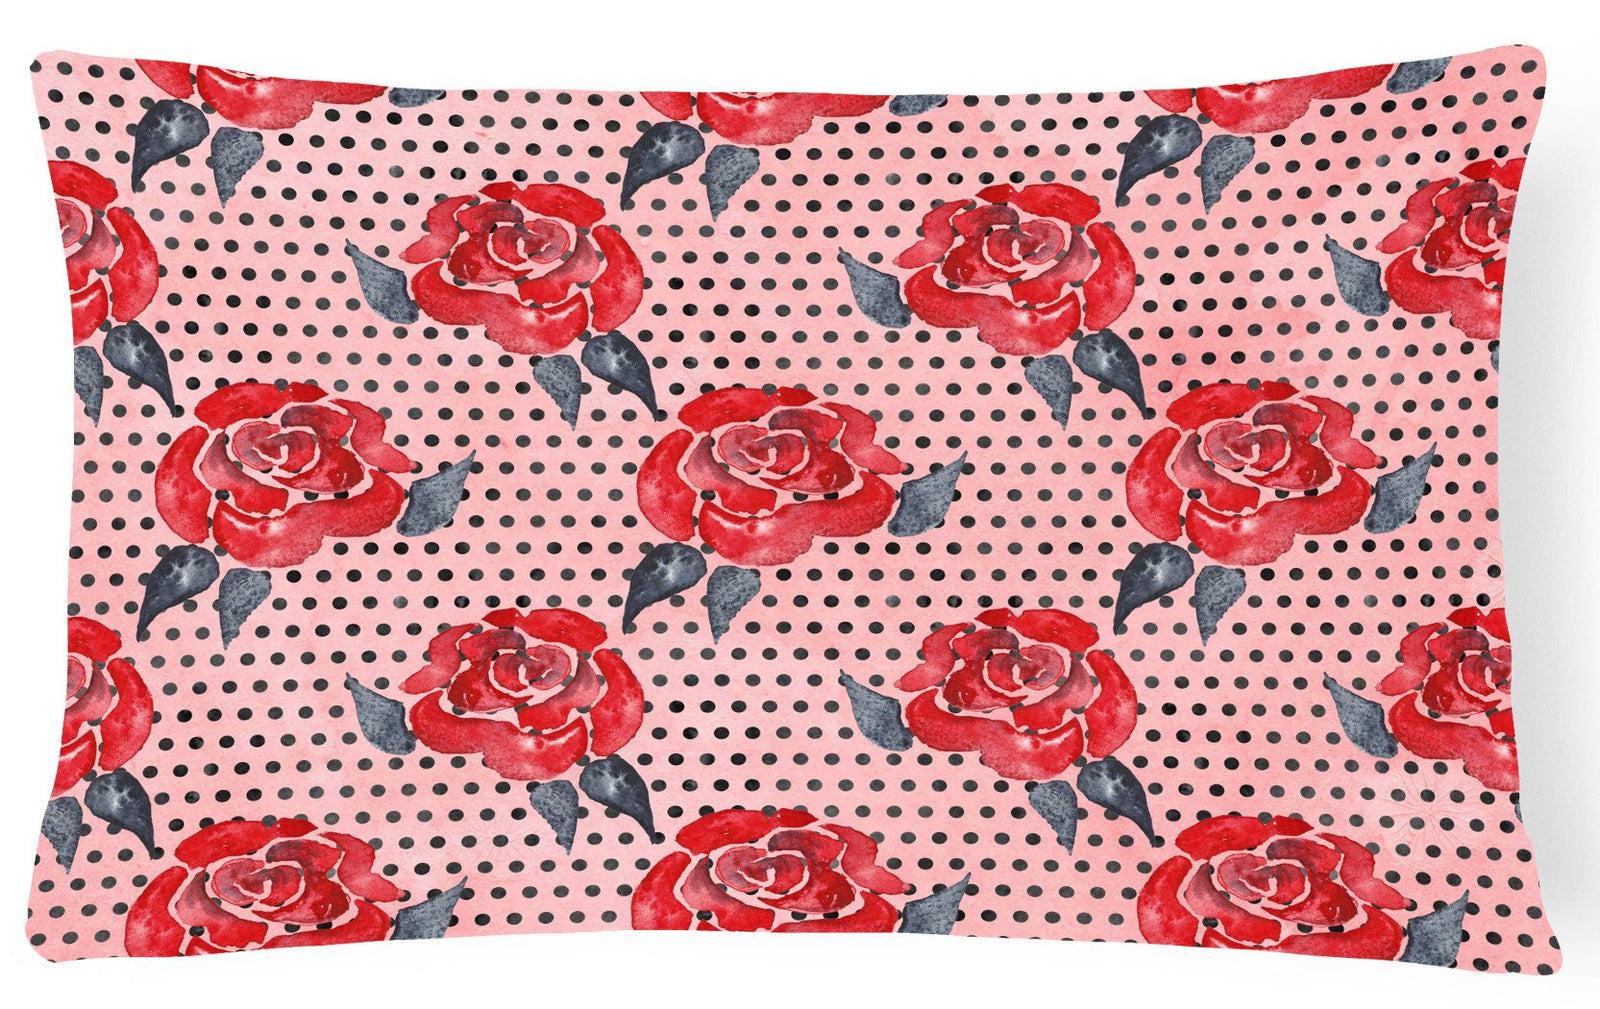 Watercolor Red Roses and Polkadots Canvas Fabric Decorative Pillow BB7513PW1216 by Caroline's Treasures